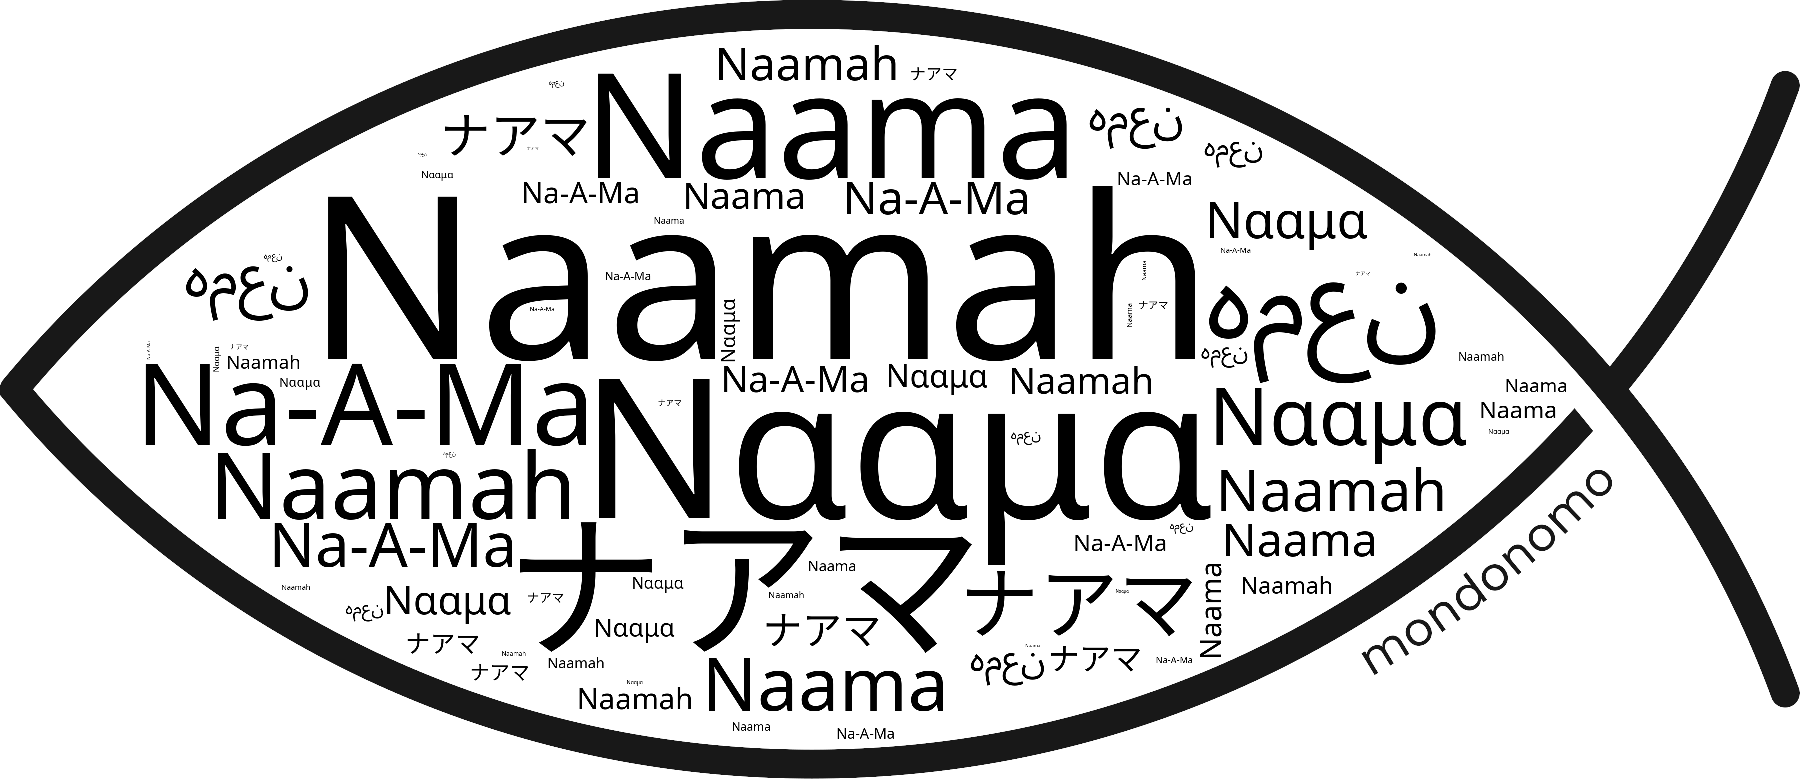 Name Naamah in the world's Bibles